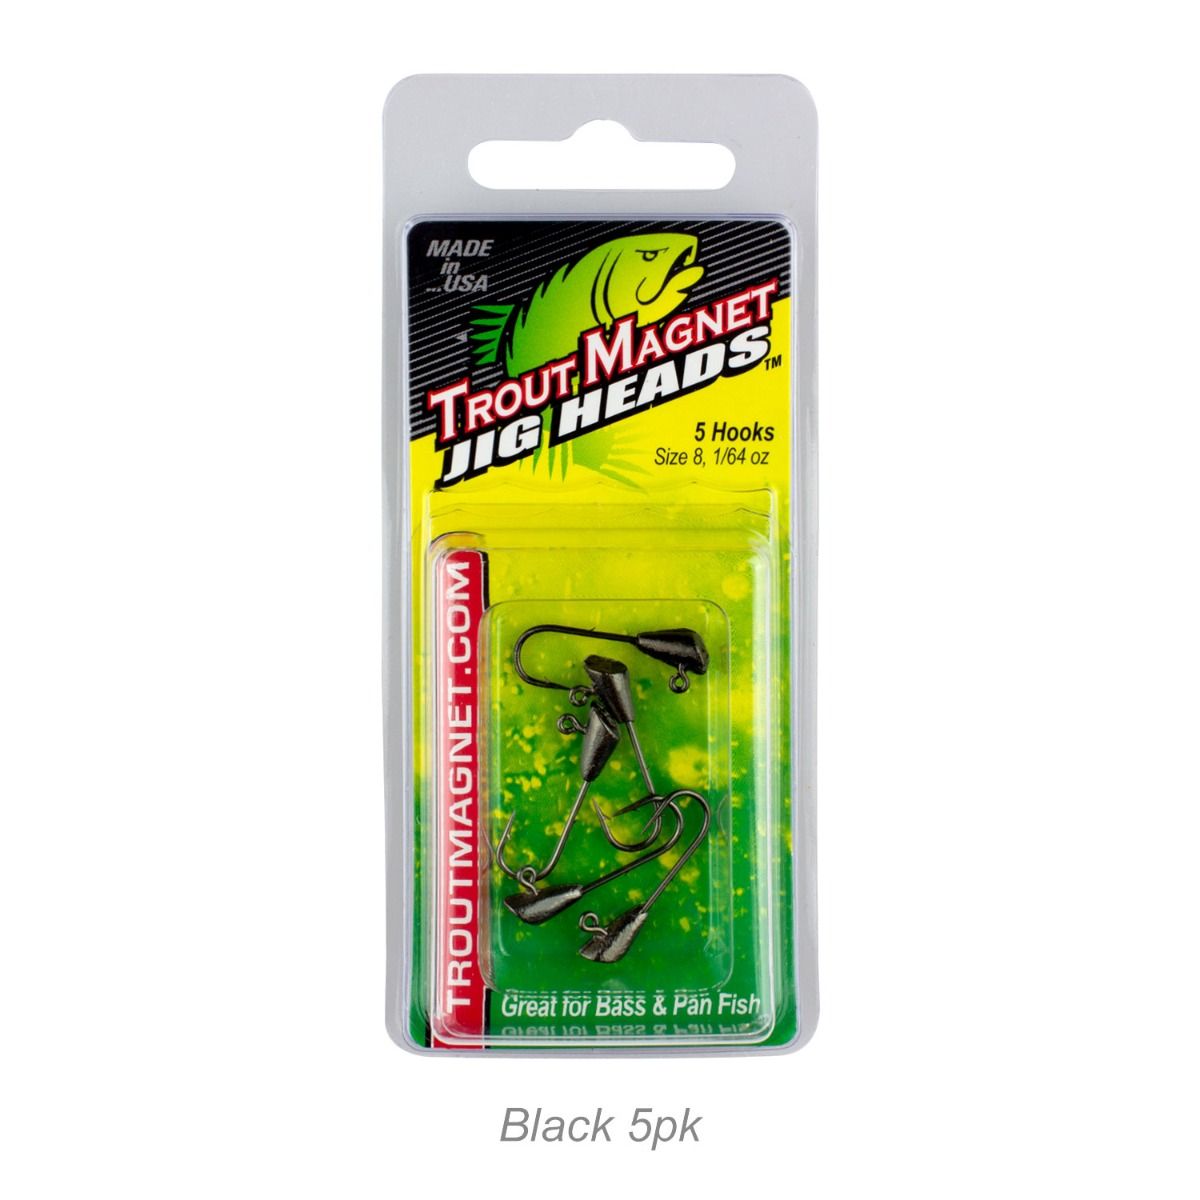 Leland Lures Trout Magnet Jig Heads 1/64oz 5pk – Tackle World